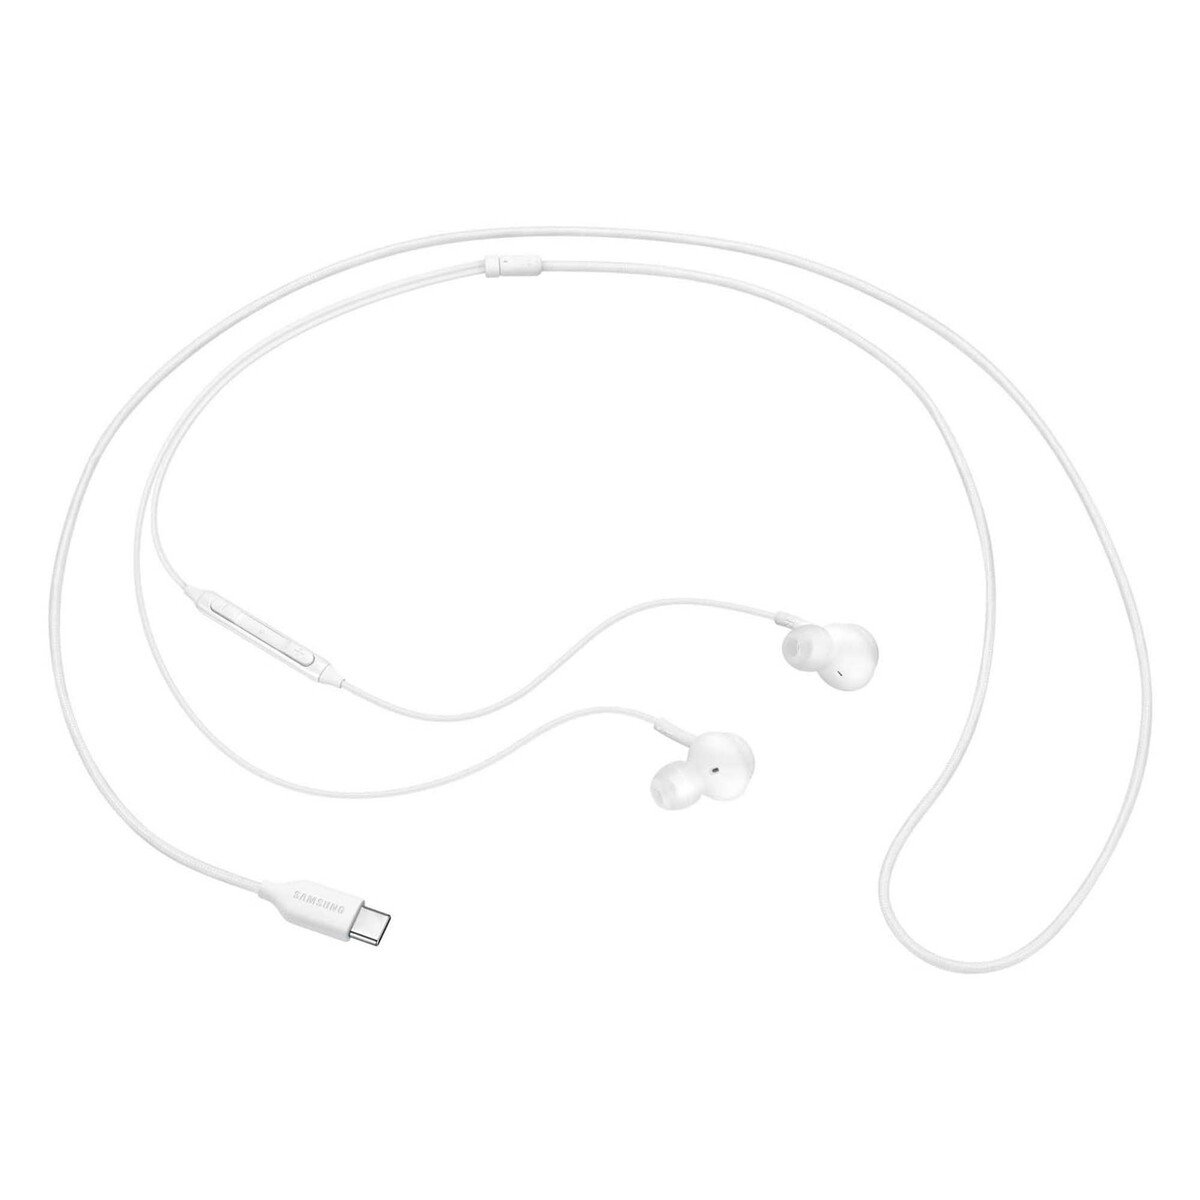 Samsung Stereo In-Ear Lulu Price Free Earphones | Online Type-C (White) | at Best Mobile Hands Kuwait EO-IC100